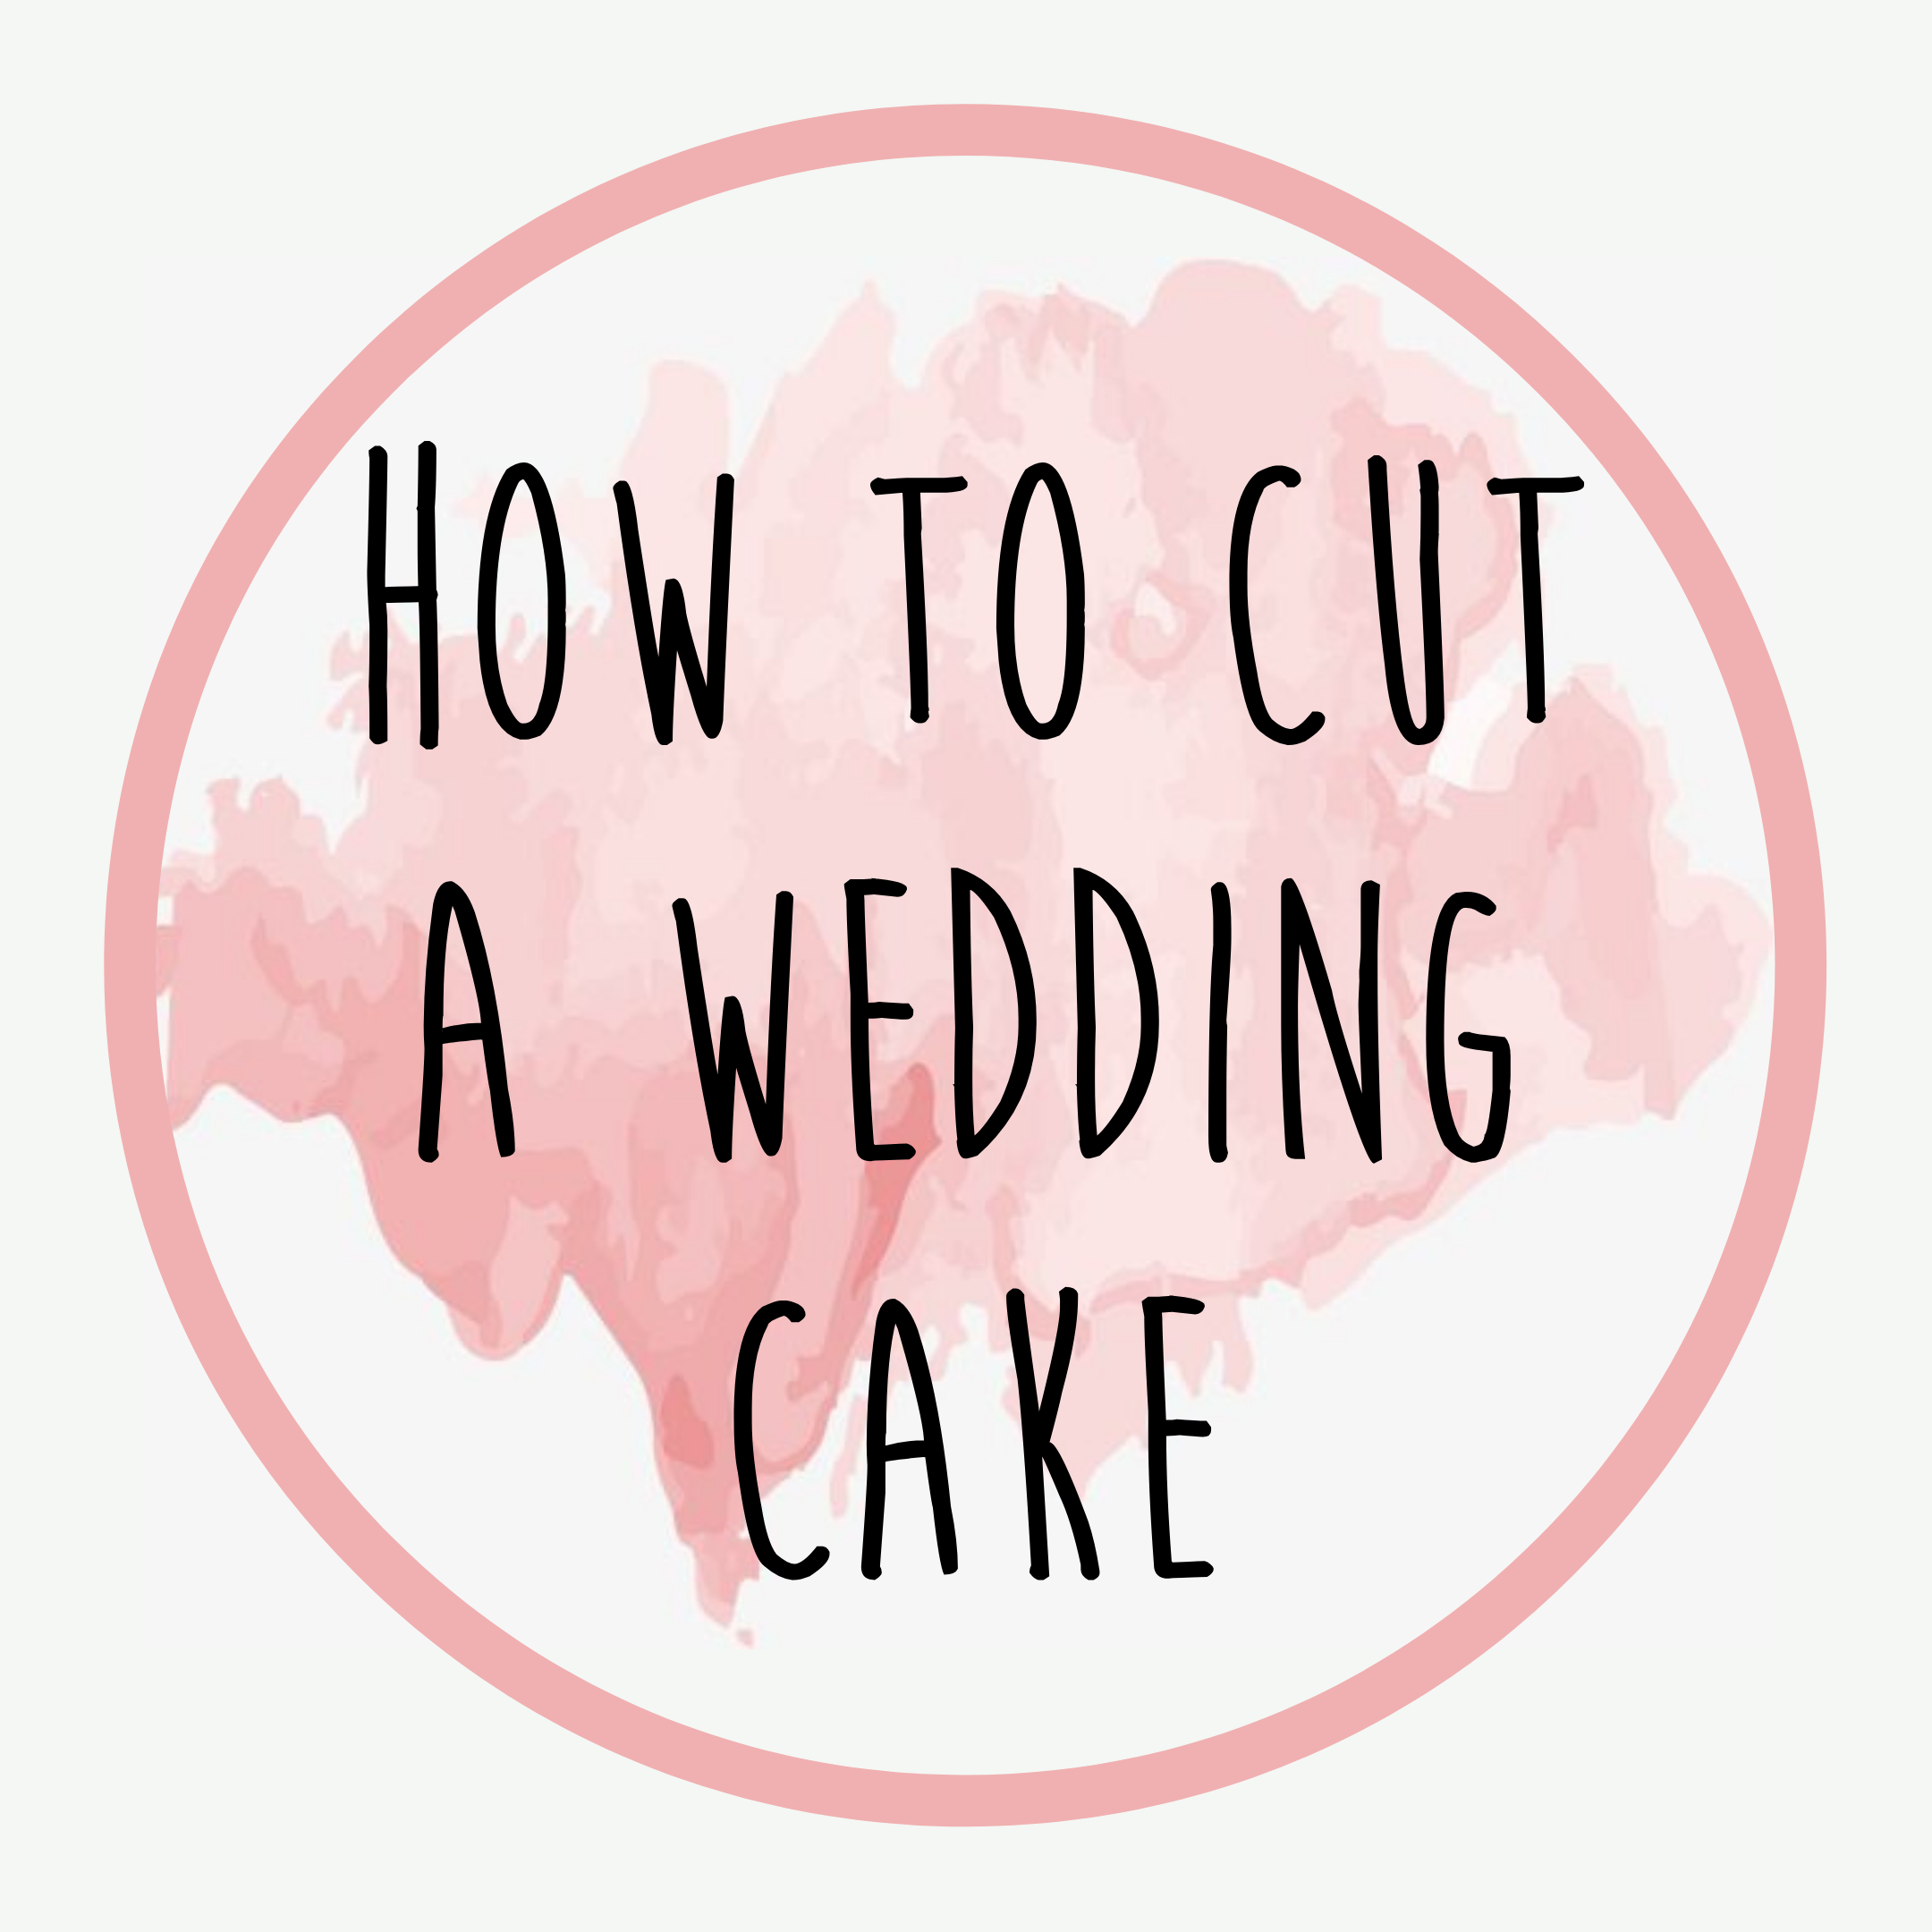 How to cut a wedding cake